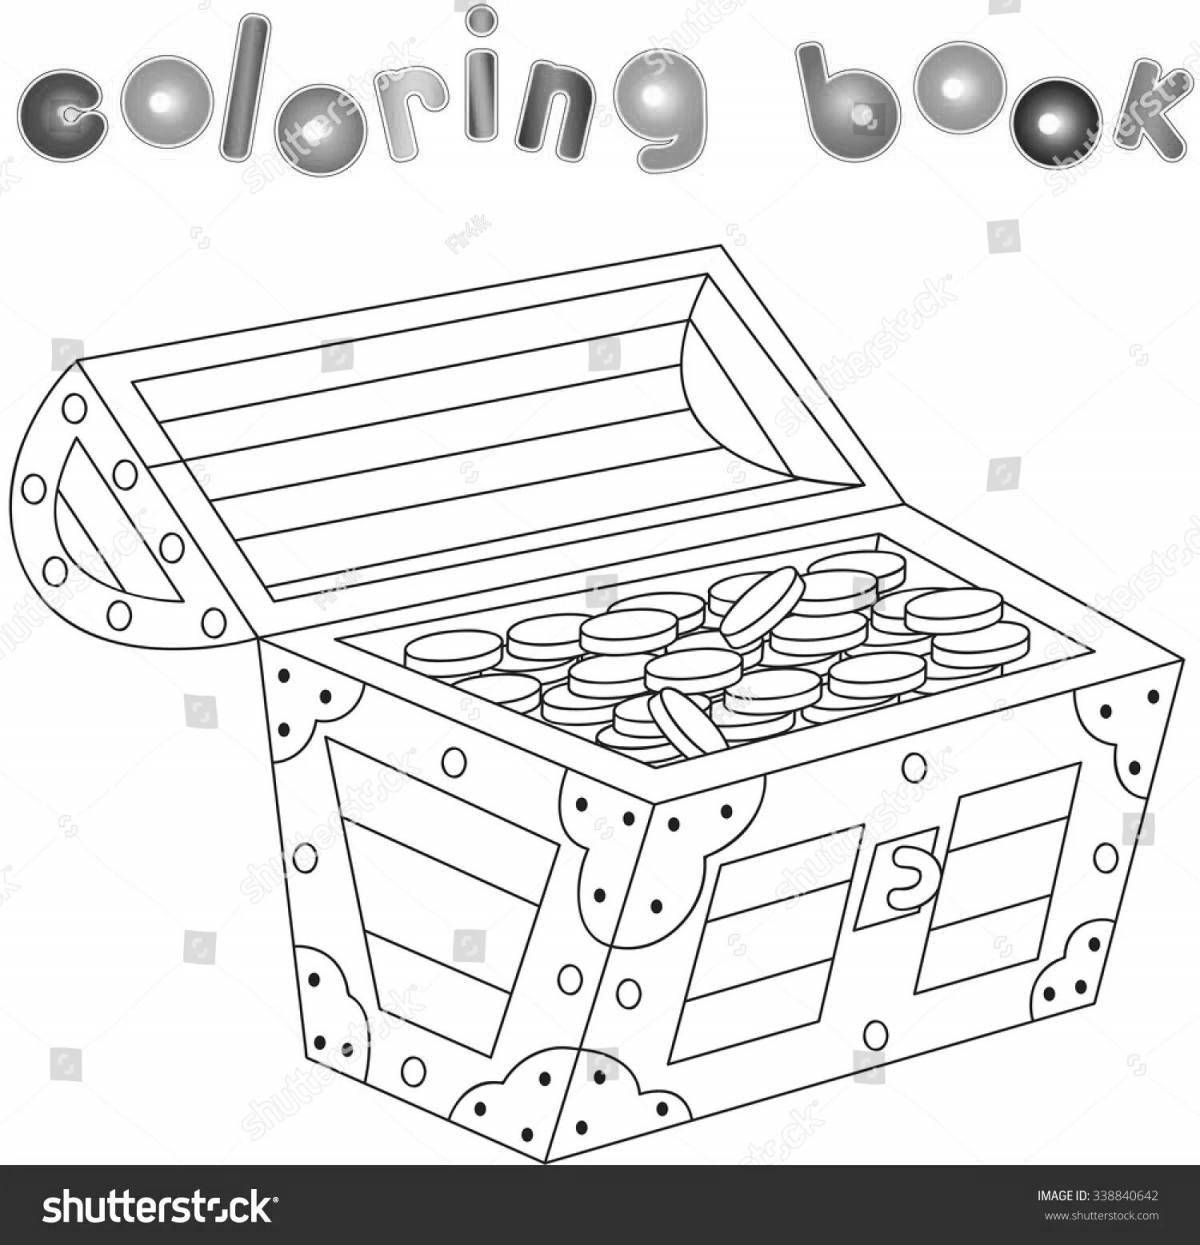 Amazing chest coloring page for kids